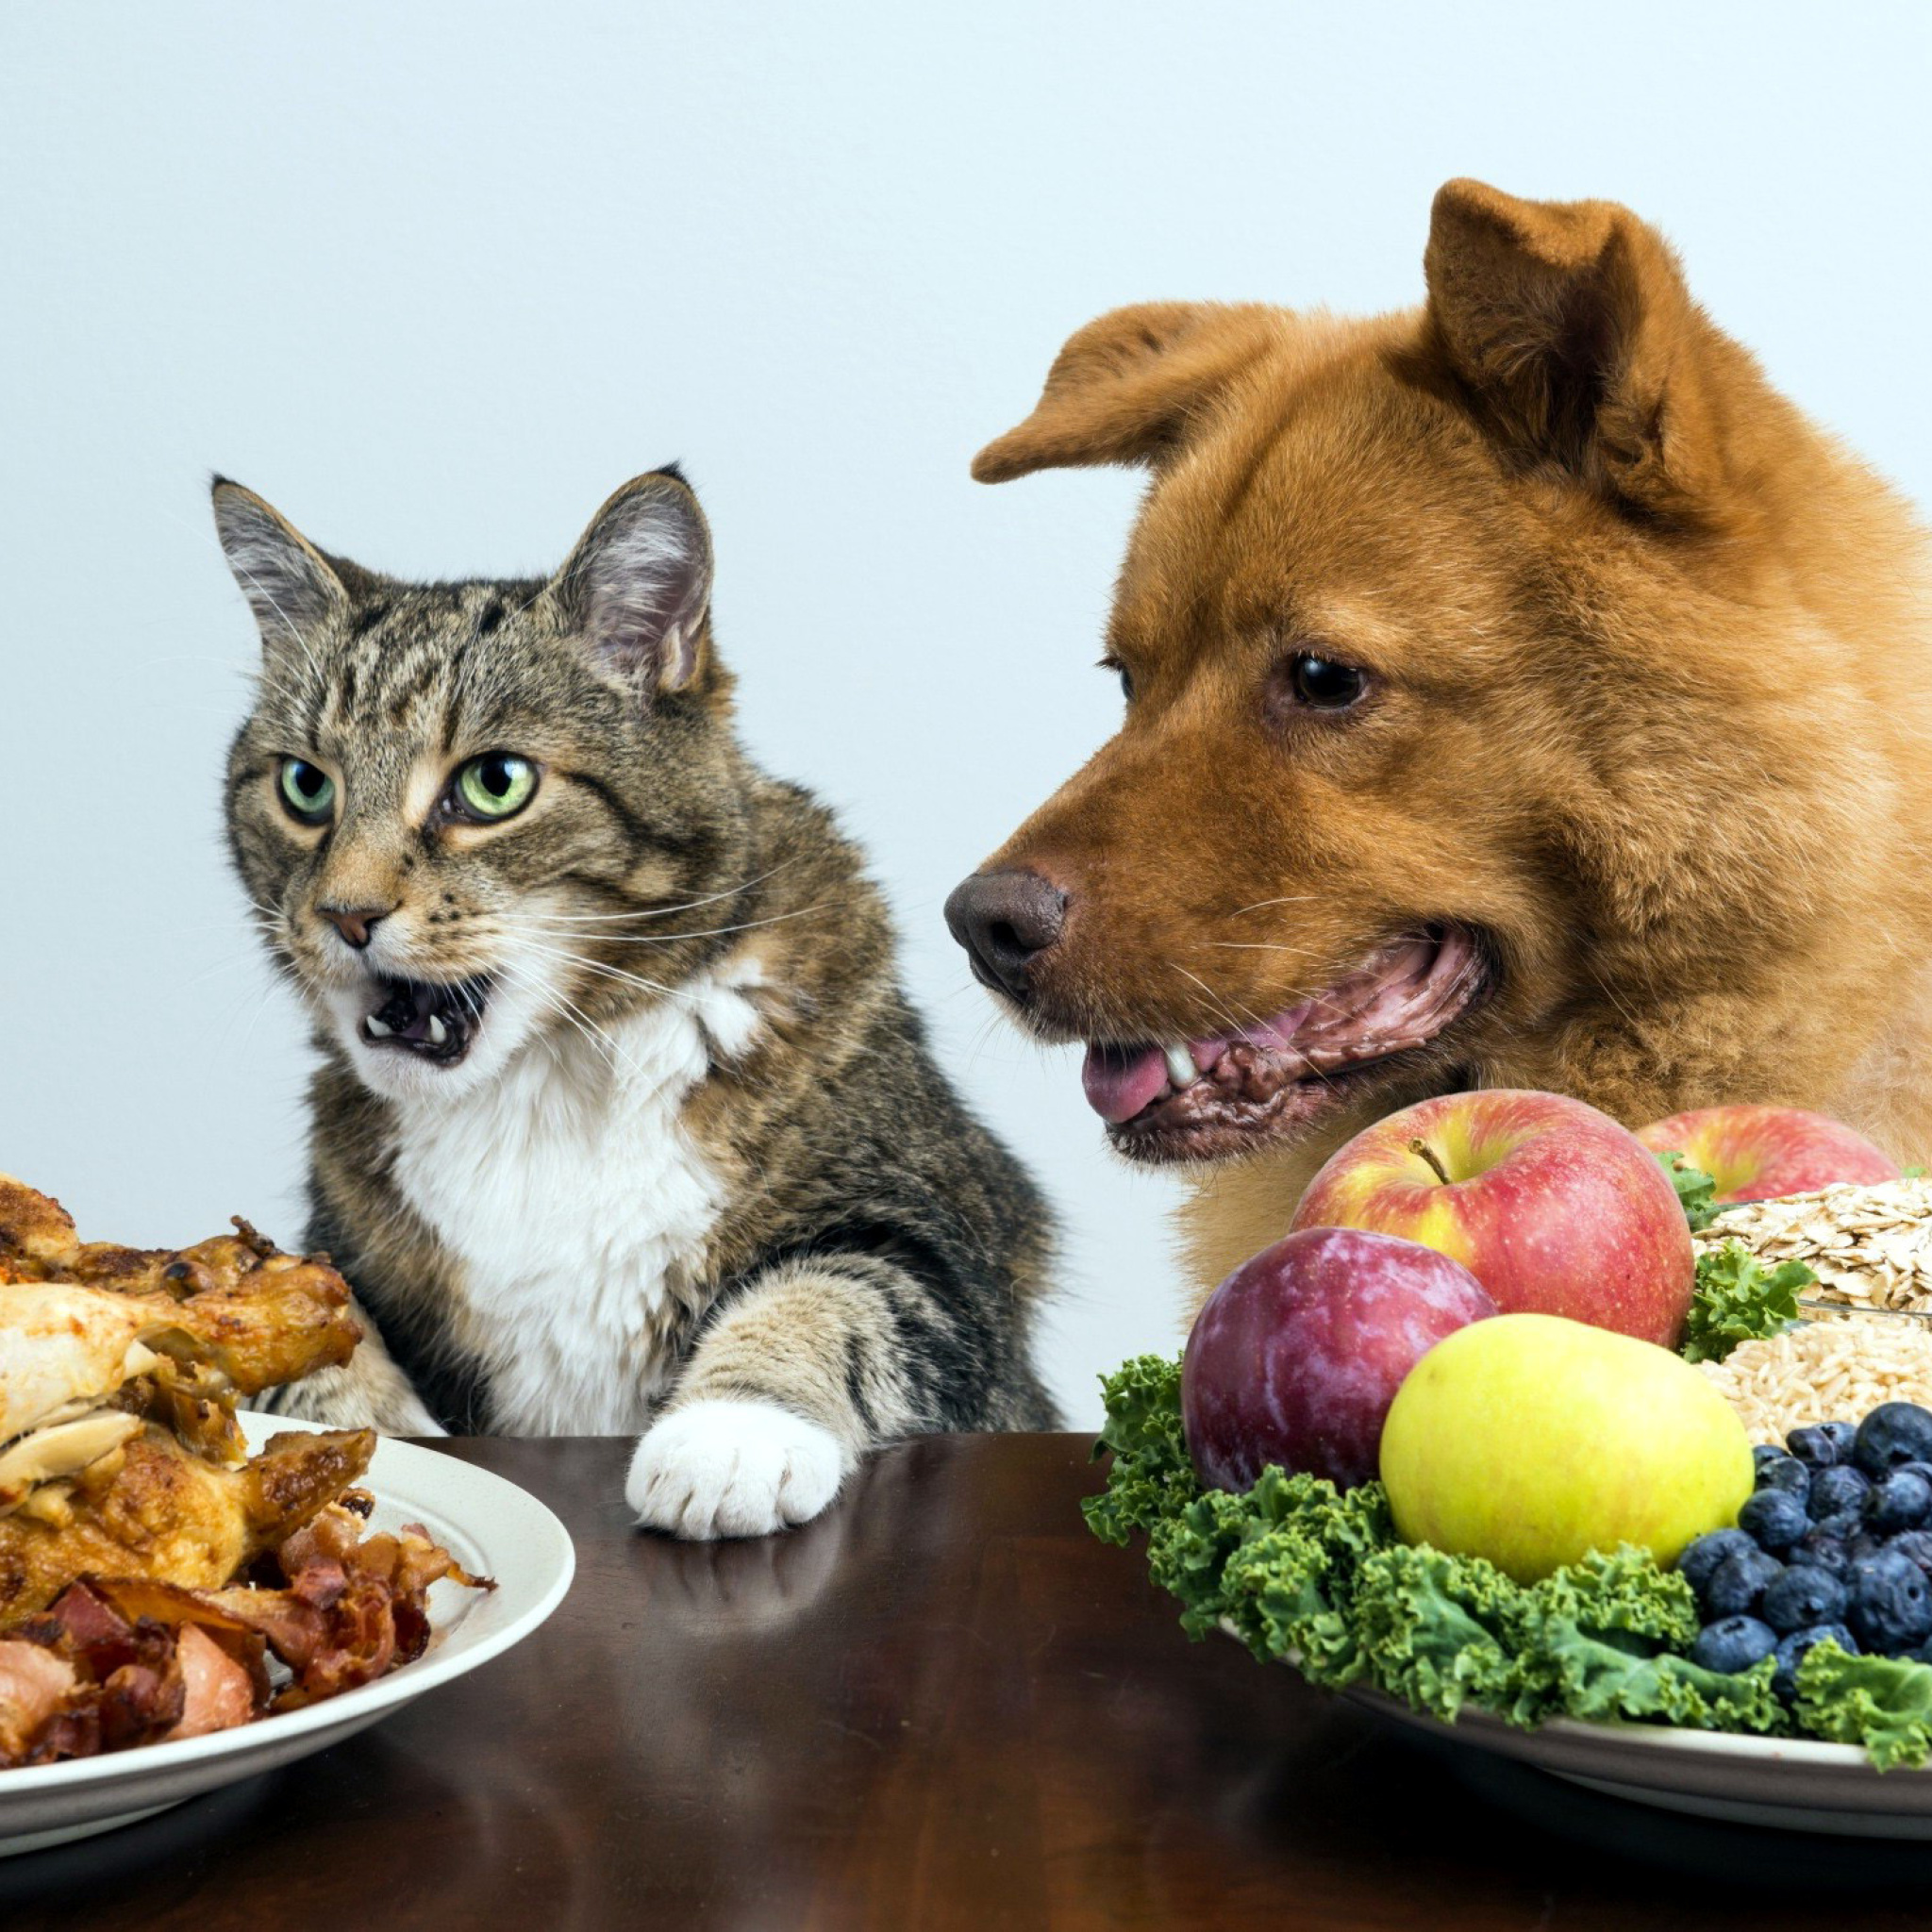 Dog and Cat Dinner wallpaper 2048x2048